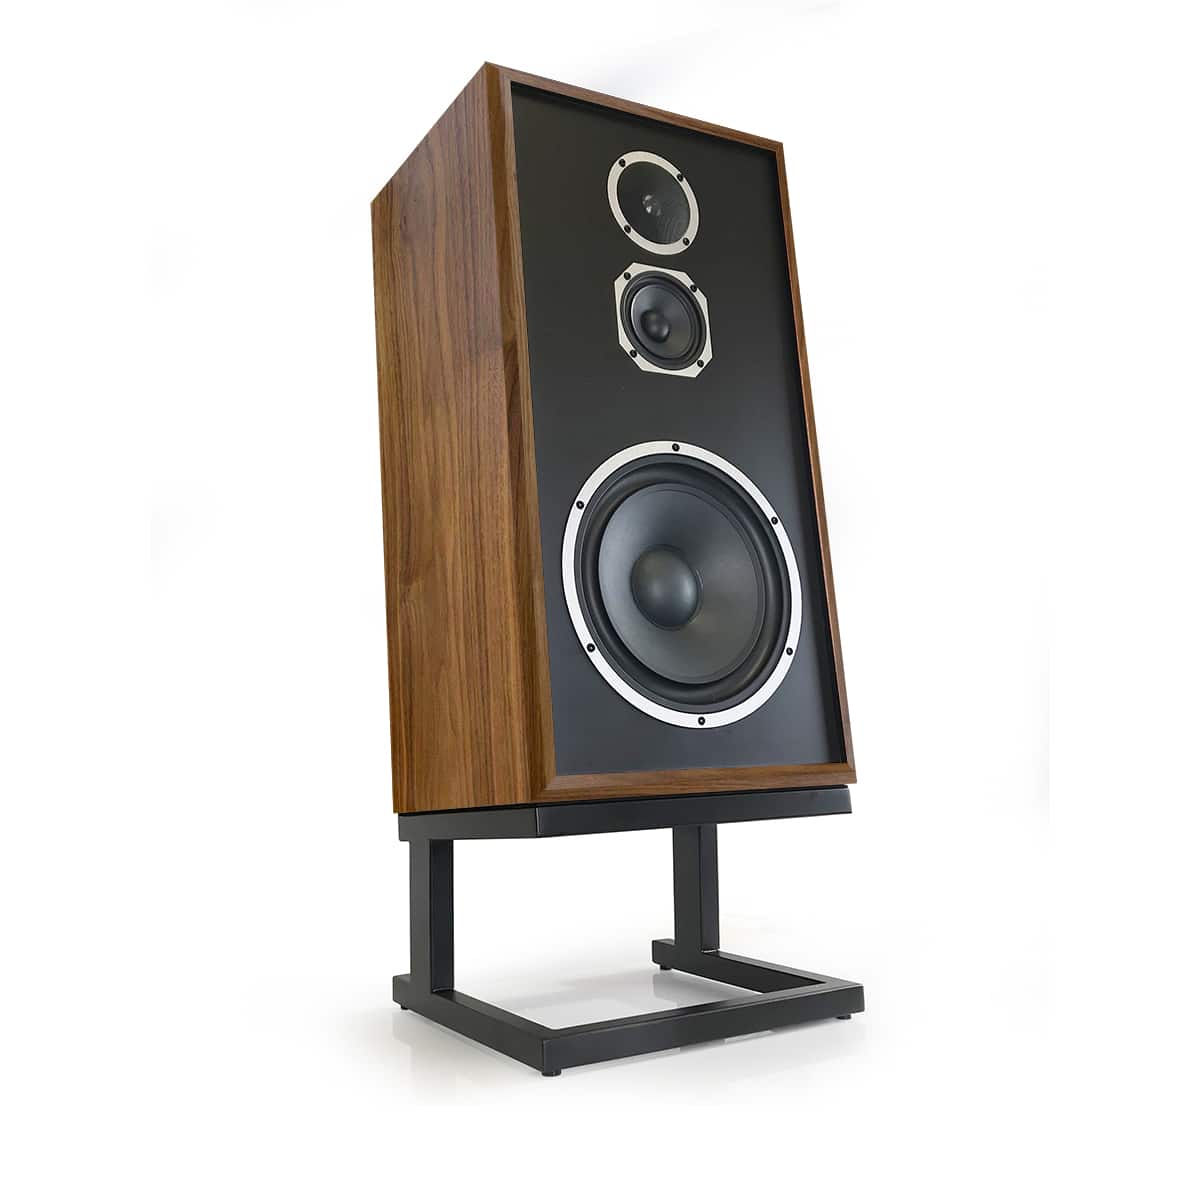 KLH MODEL 5 SPEAKERS - KLH Audio is an American audio electronics brand for high quality audio speakers, Home Audio Systems, Headphones. Check out all the KLH Audio models at Vinyl Sound: Home Theater Systems, Floorstanding Speakers, Bookshelf Speakers, The KLH Model Five Floorstanding, KLH Faraday series, KLH Maxwell series, KLH Ulimate One Zebra,The KLH Model Five vintage speaker, Bookshelf Speakers and more...